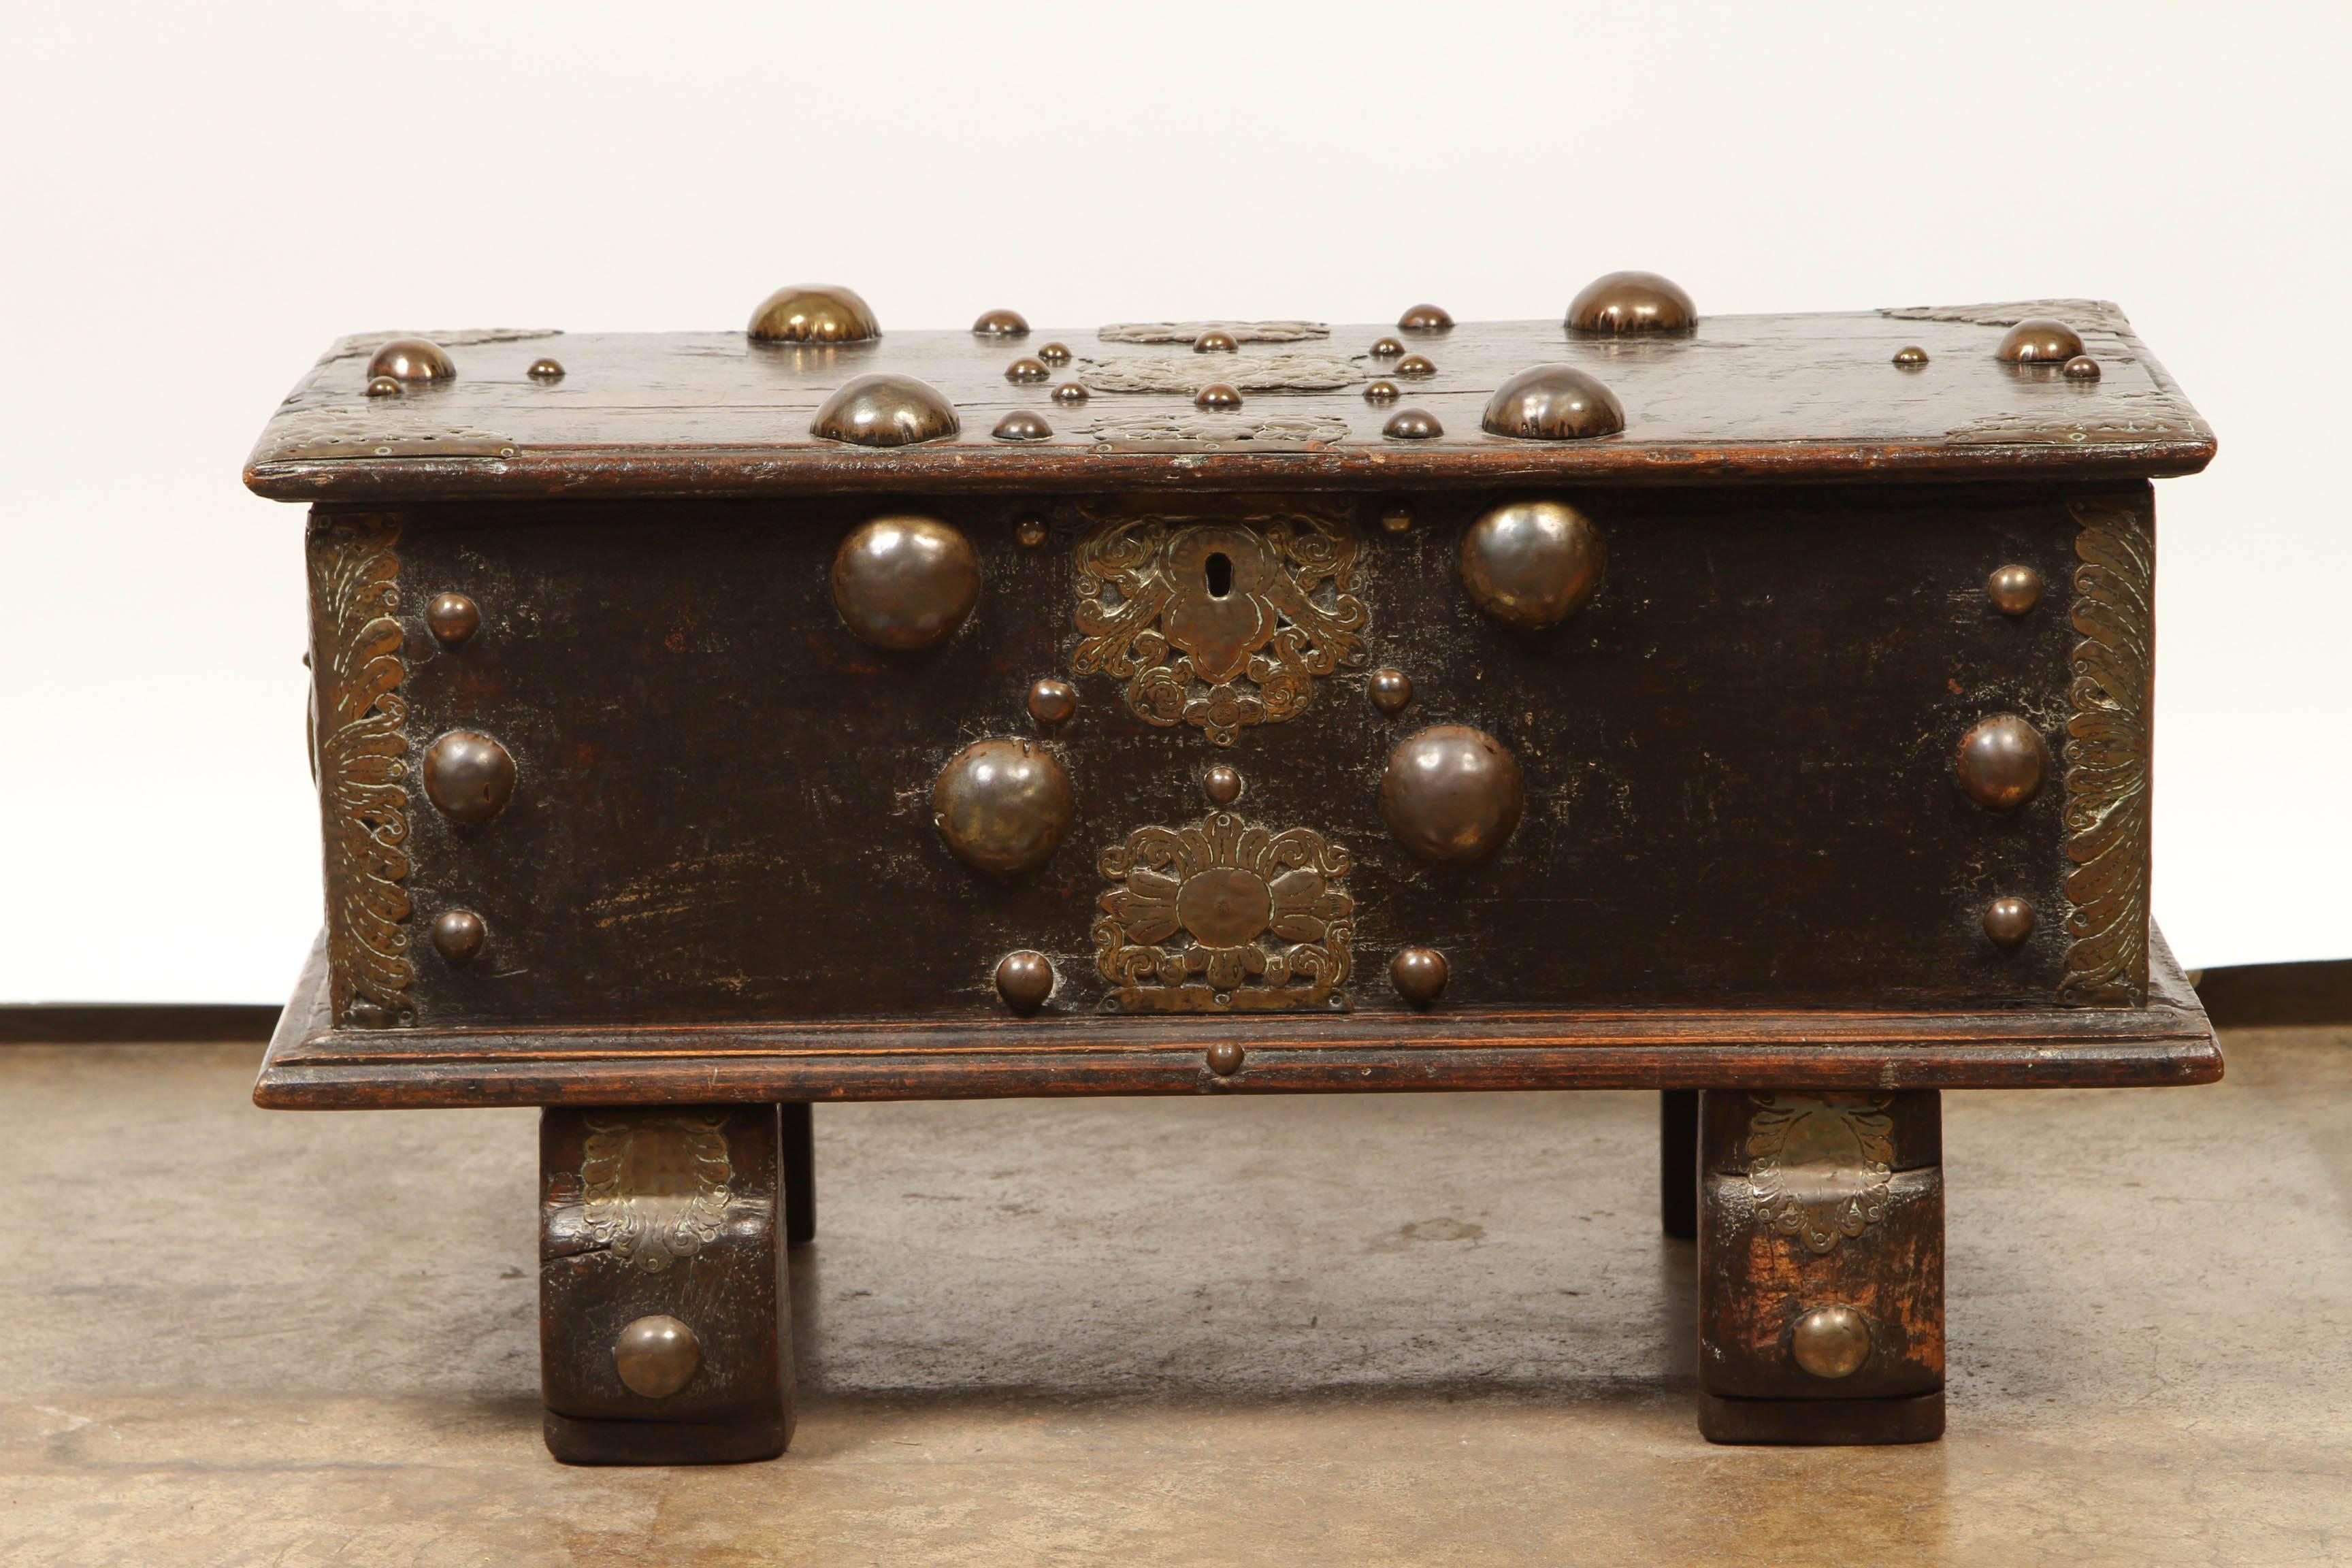 Dutch Colonial, from Ceylon (now Sri Lanka). Deeply Patinated Jack Wood decorated with Brass Caps, overlay and straps, on a pair of strut feet.